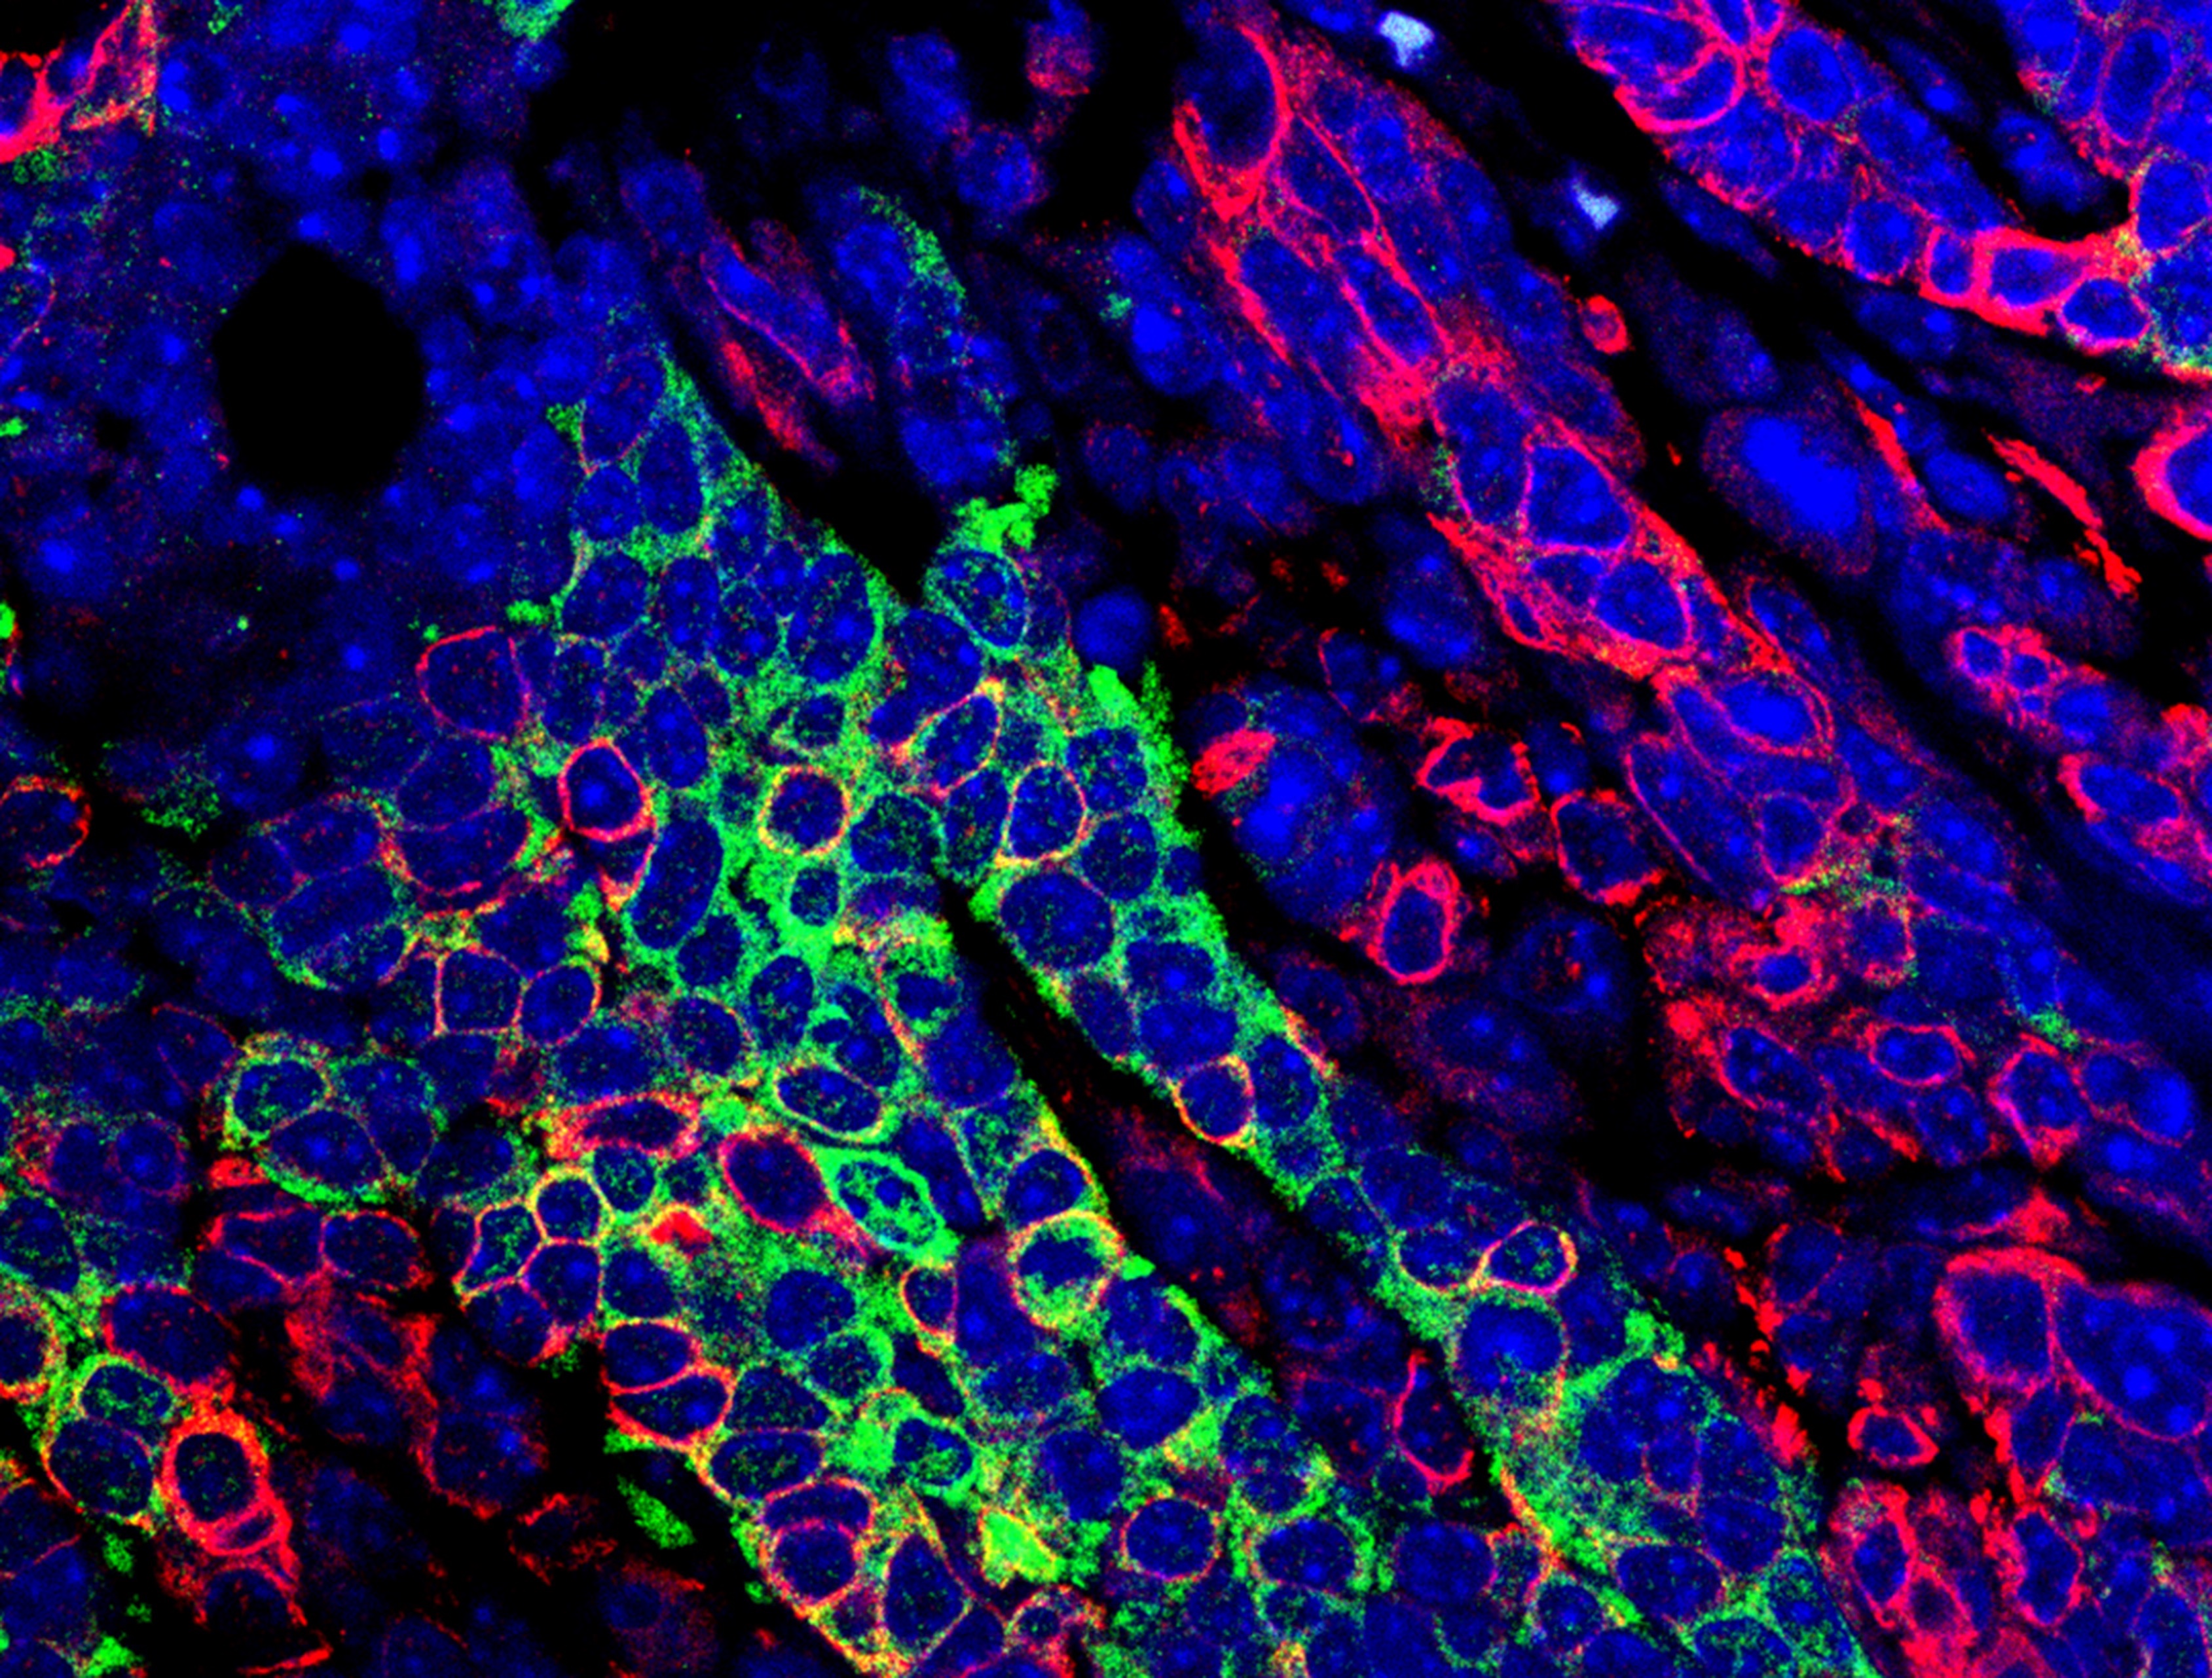 Fluorescent microscopic image shows mammary gland cells